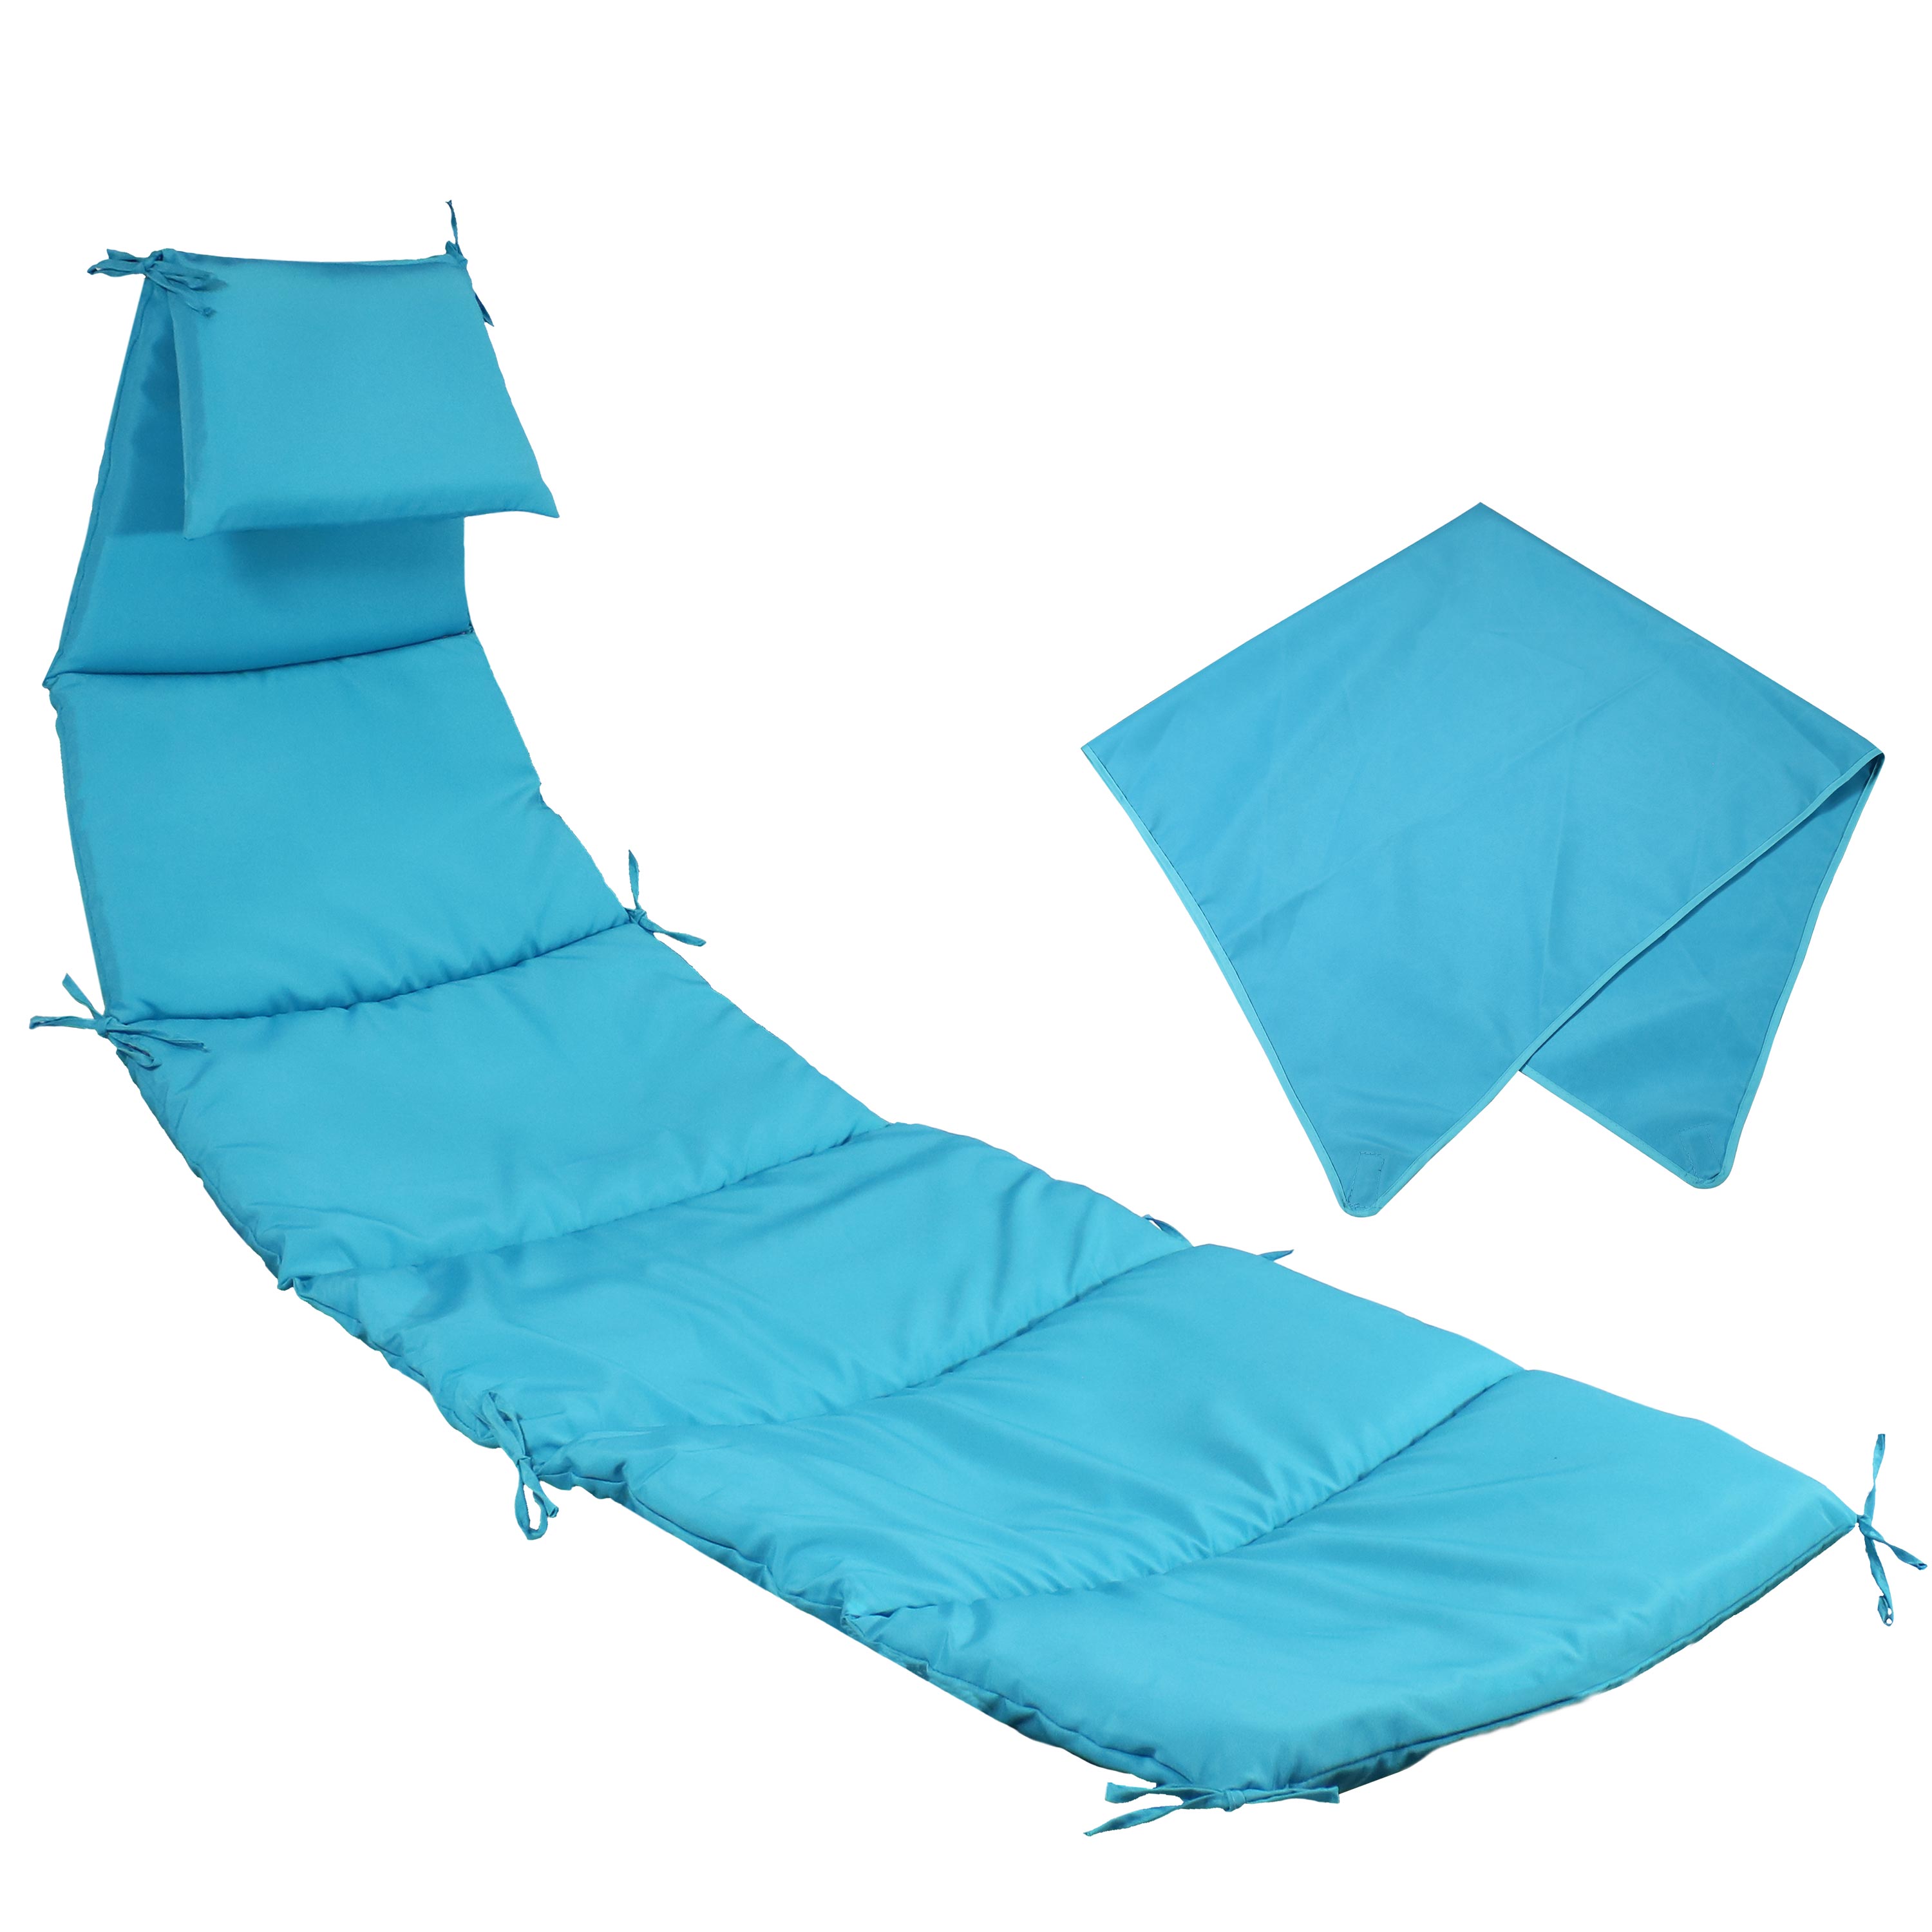 Outdoor Hanging Lounge Chair Replacement Cushion and Umbrella Fabric for Chaise Hanging Hammock Chair - image 1 of 3